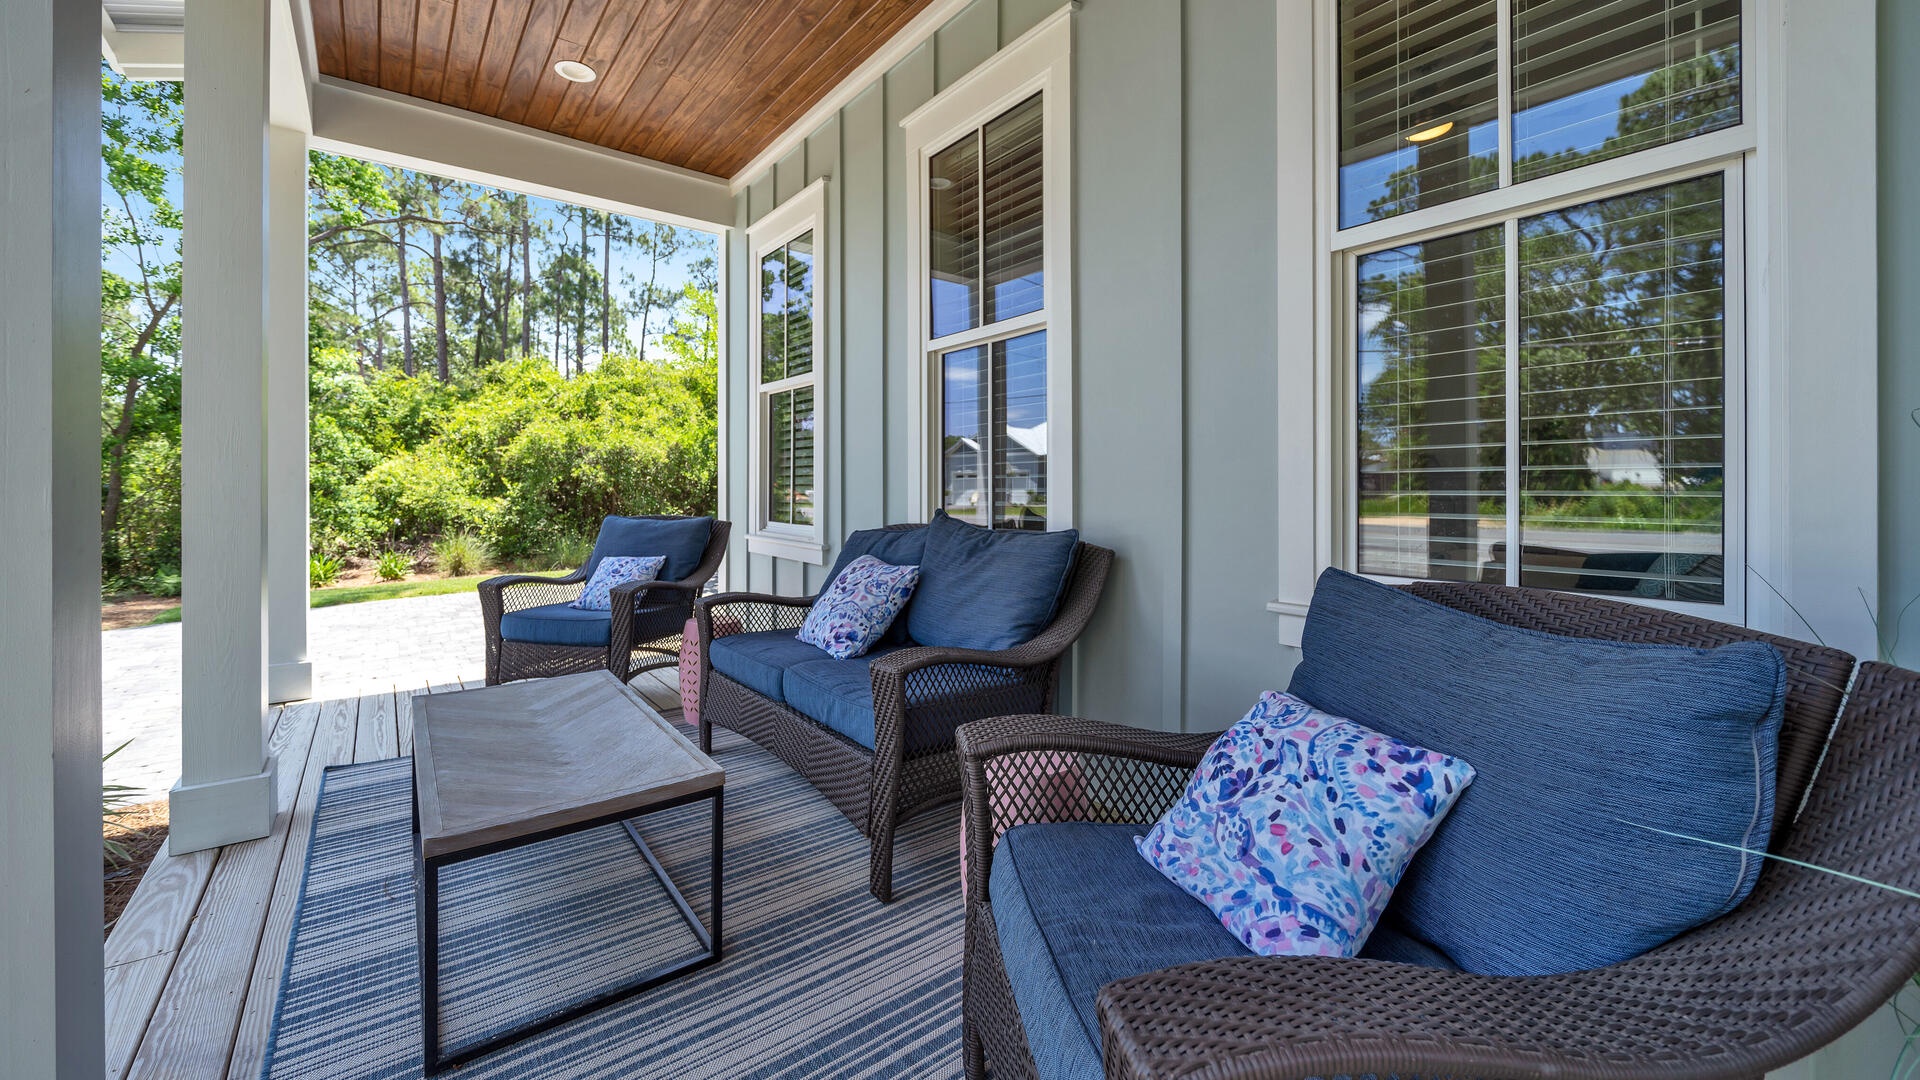 Lounge on the shaded front porch!